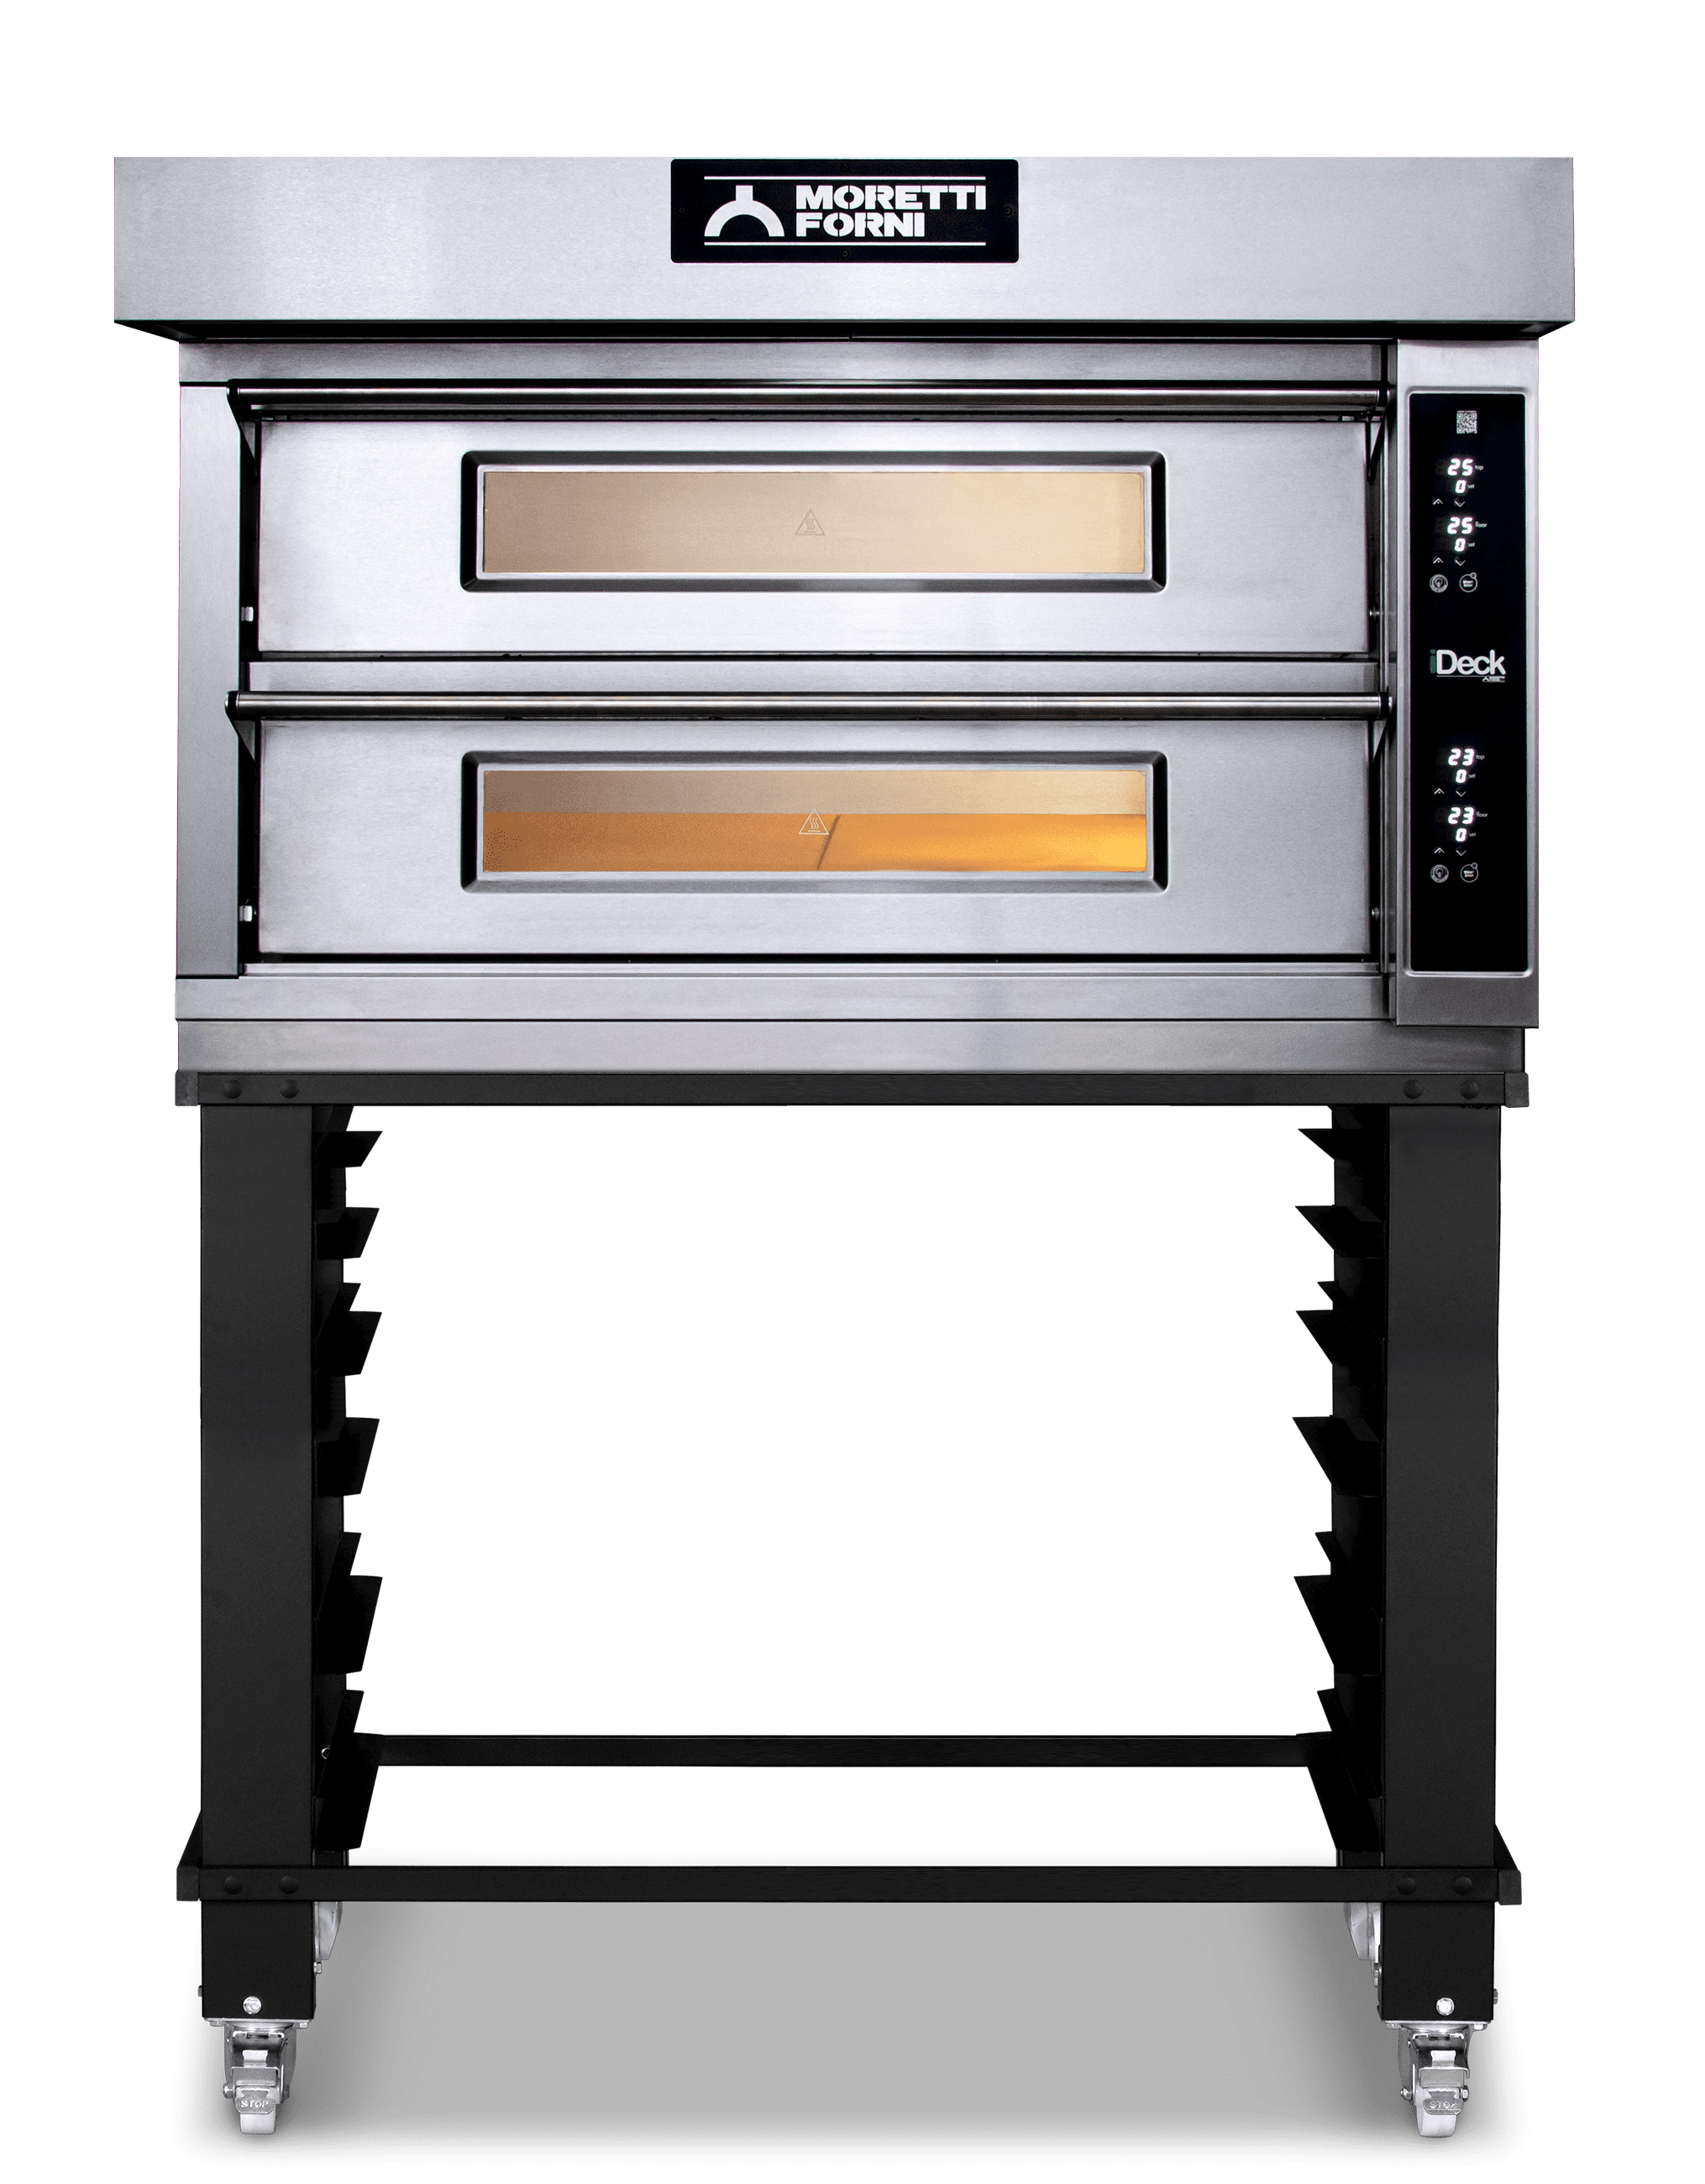 ID-D 105.65 iDeck electronic Control Electric Pizza Oven 41" x 25" chamber (Internal) . 2 Deck